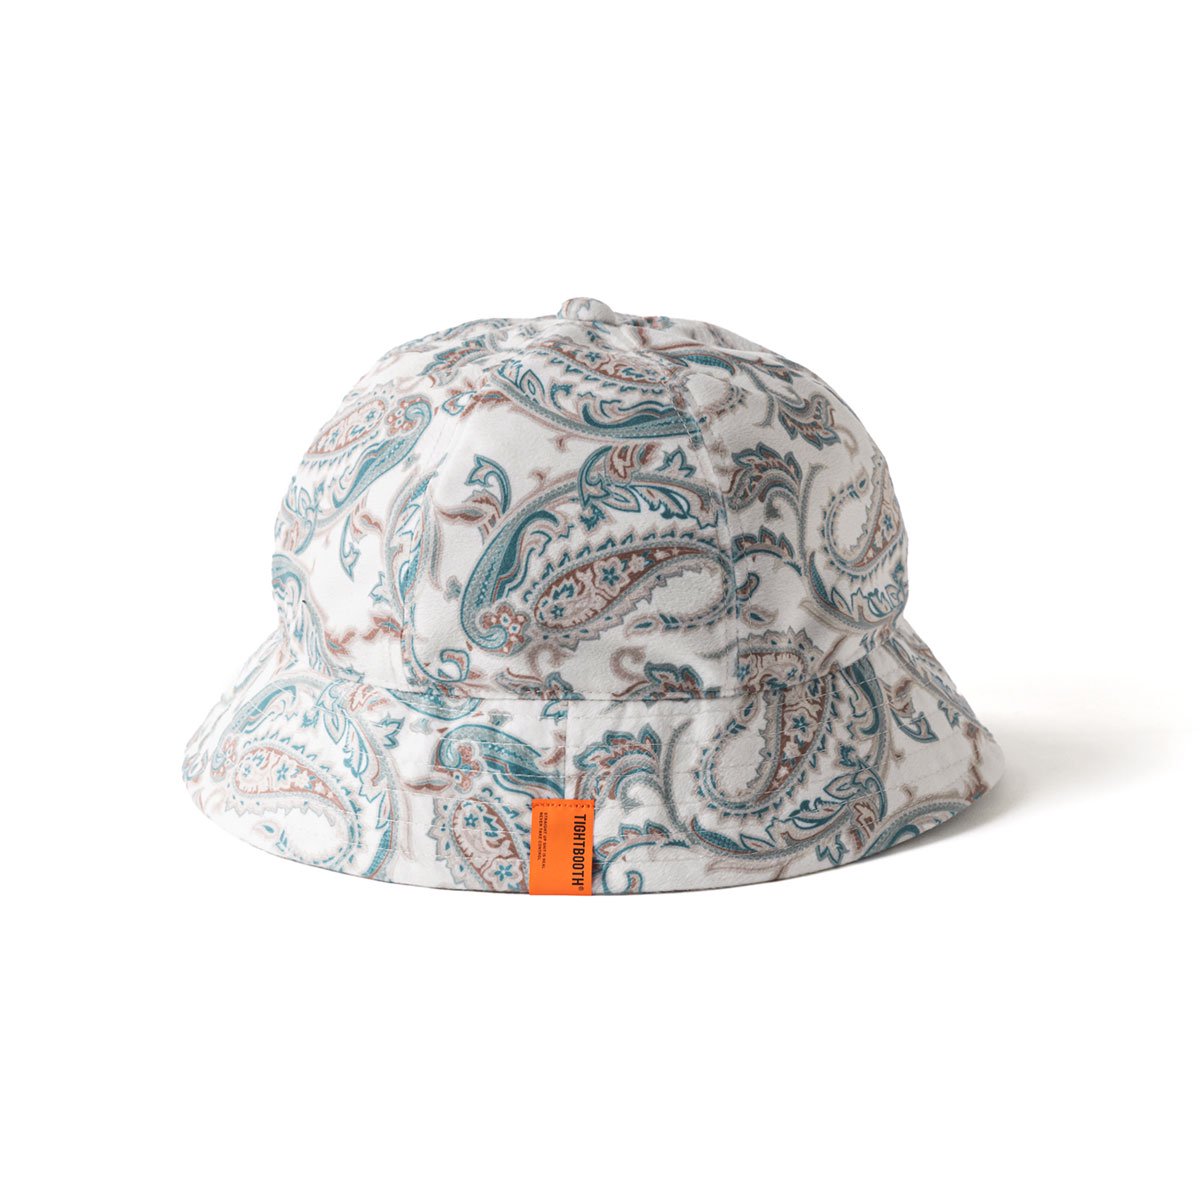 TIGHTBOOTH - PAISLEY VELOUR HAT - SHRED